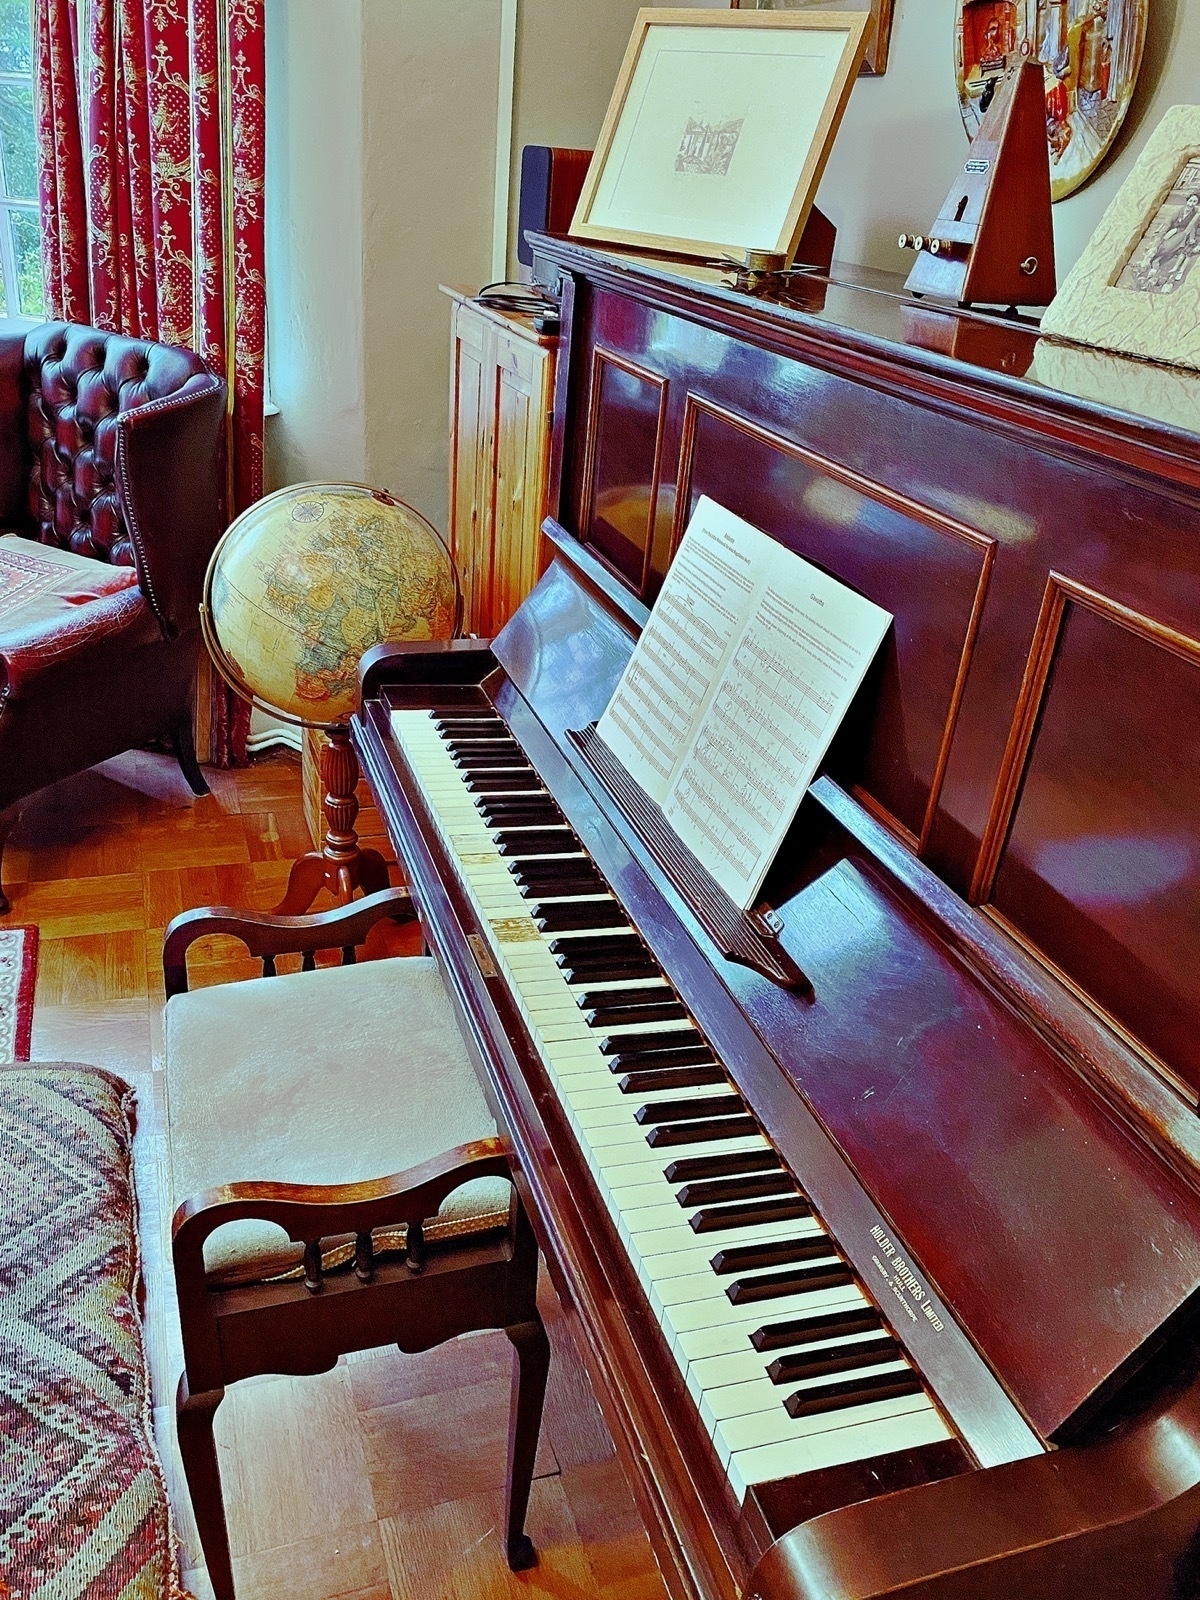 Upright piano with sheet music propped above the keys